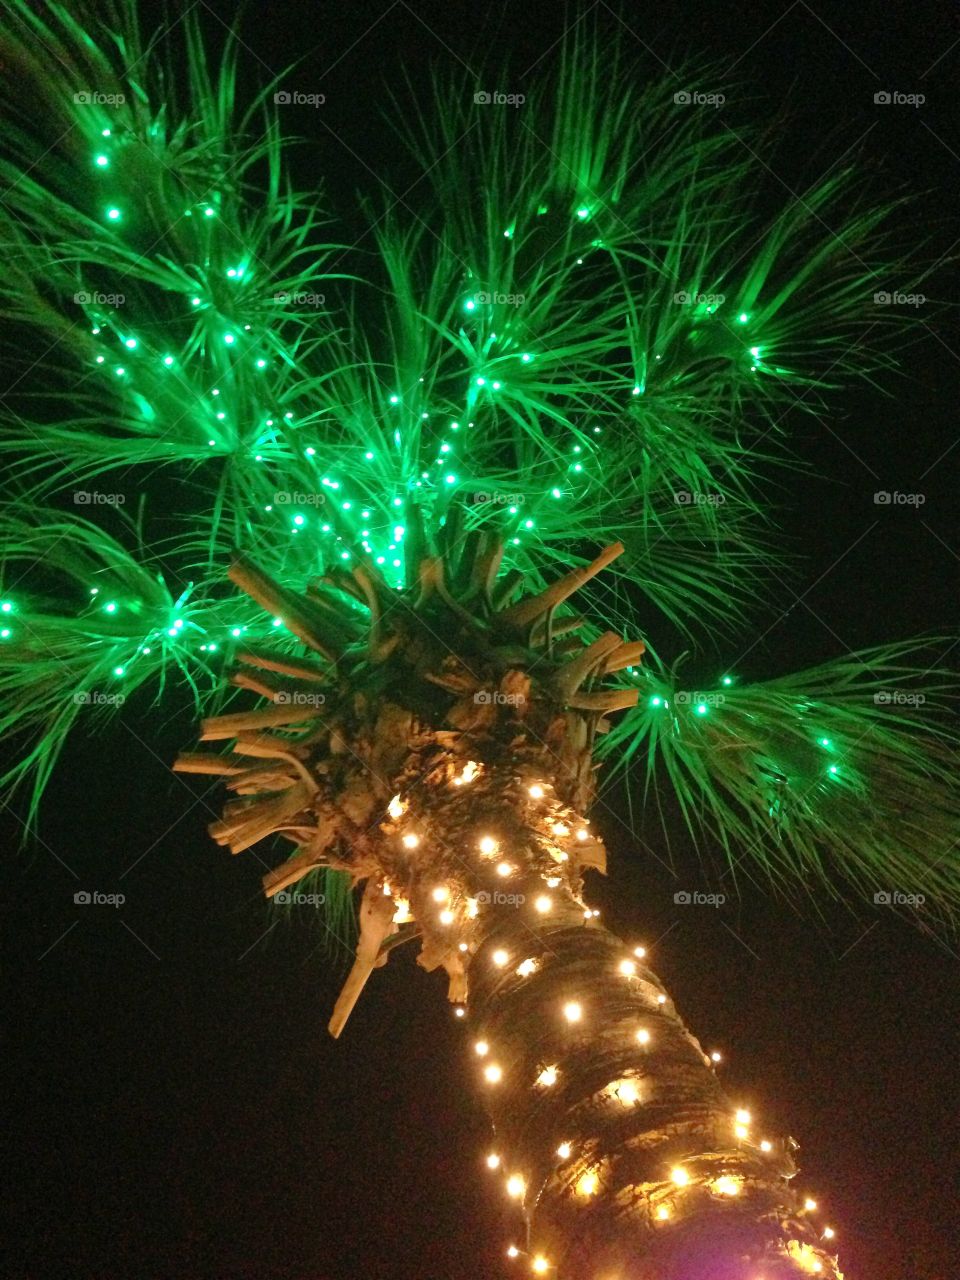 A palmetto tree decorated for Christmas in myrtle Beach South Carolina.